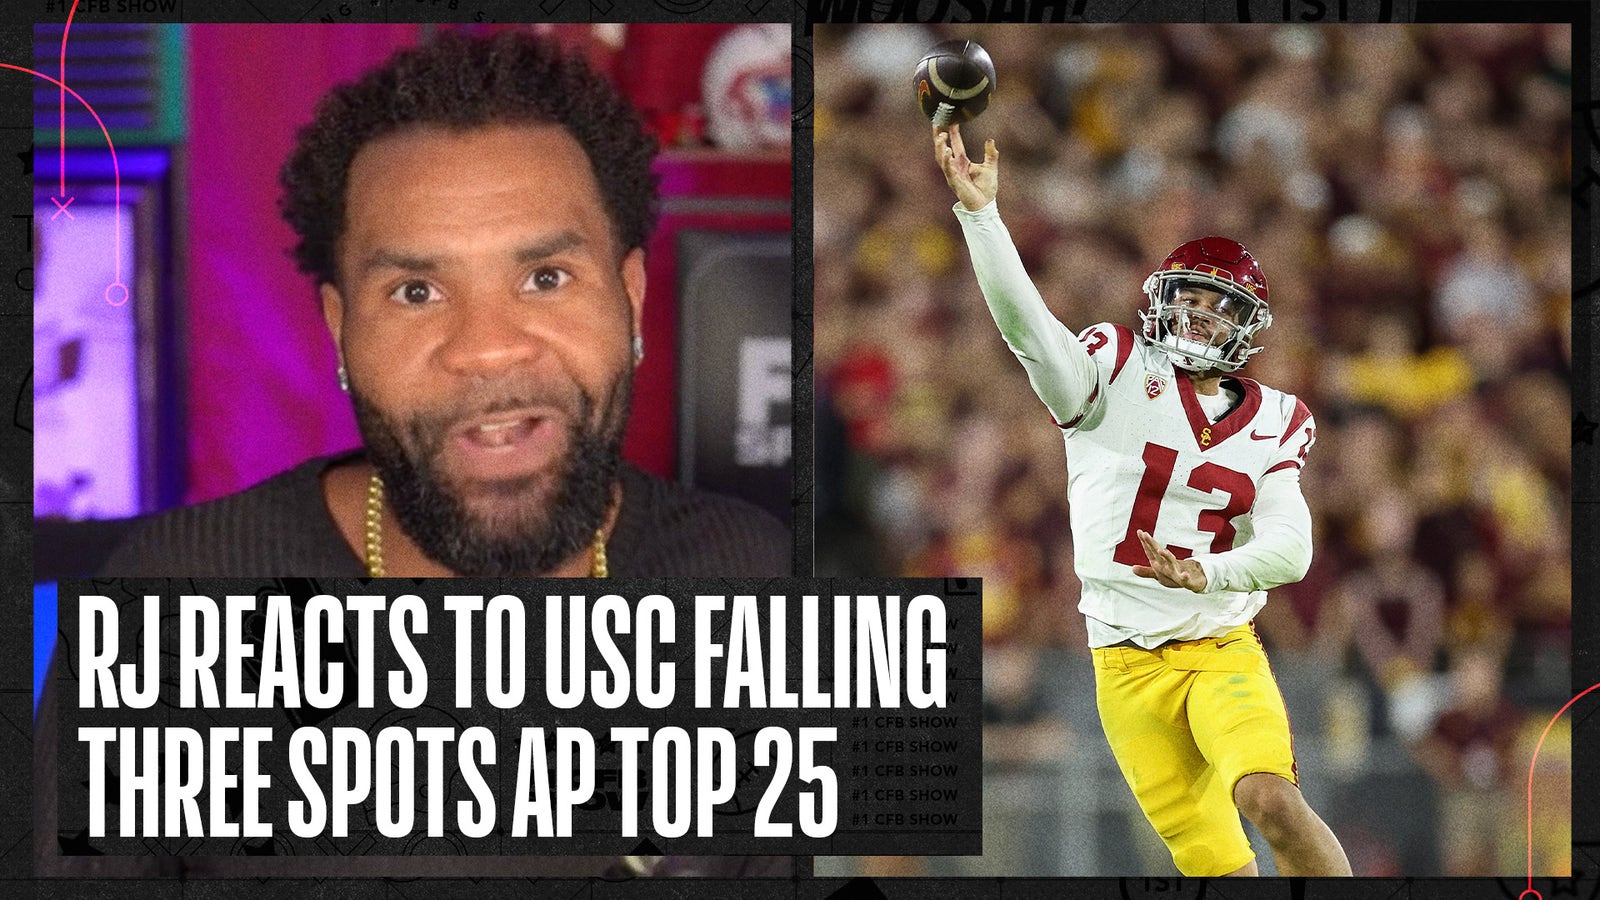 RJ Young shares his thoughts on USC dropping three spots in AP Top 25.